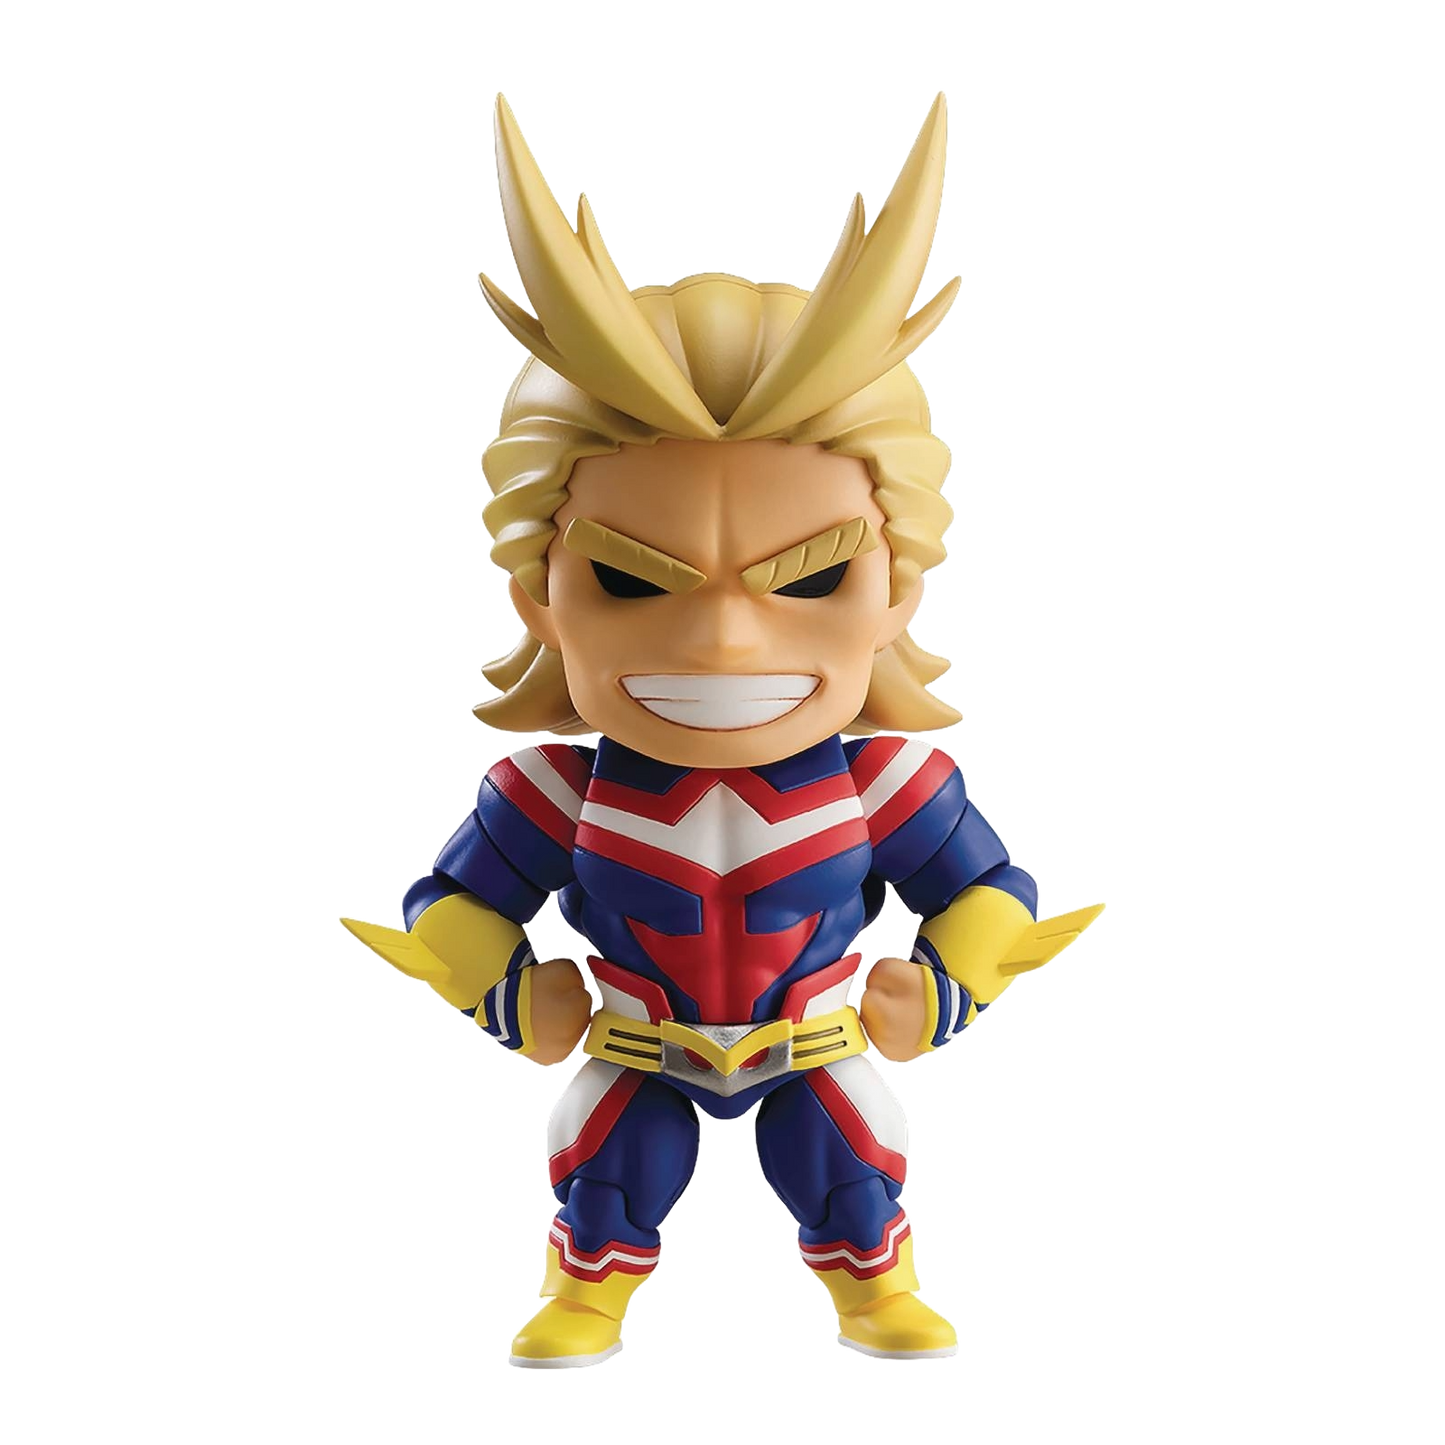 10 cm All Might Action Figure